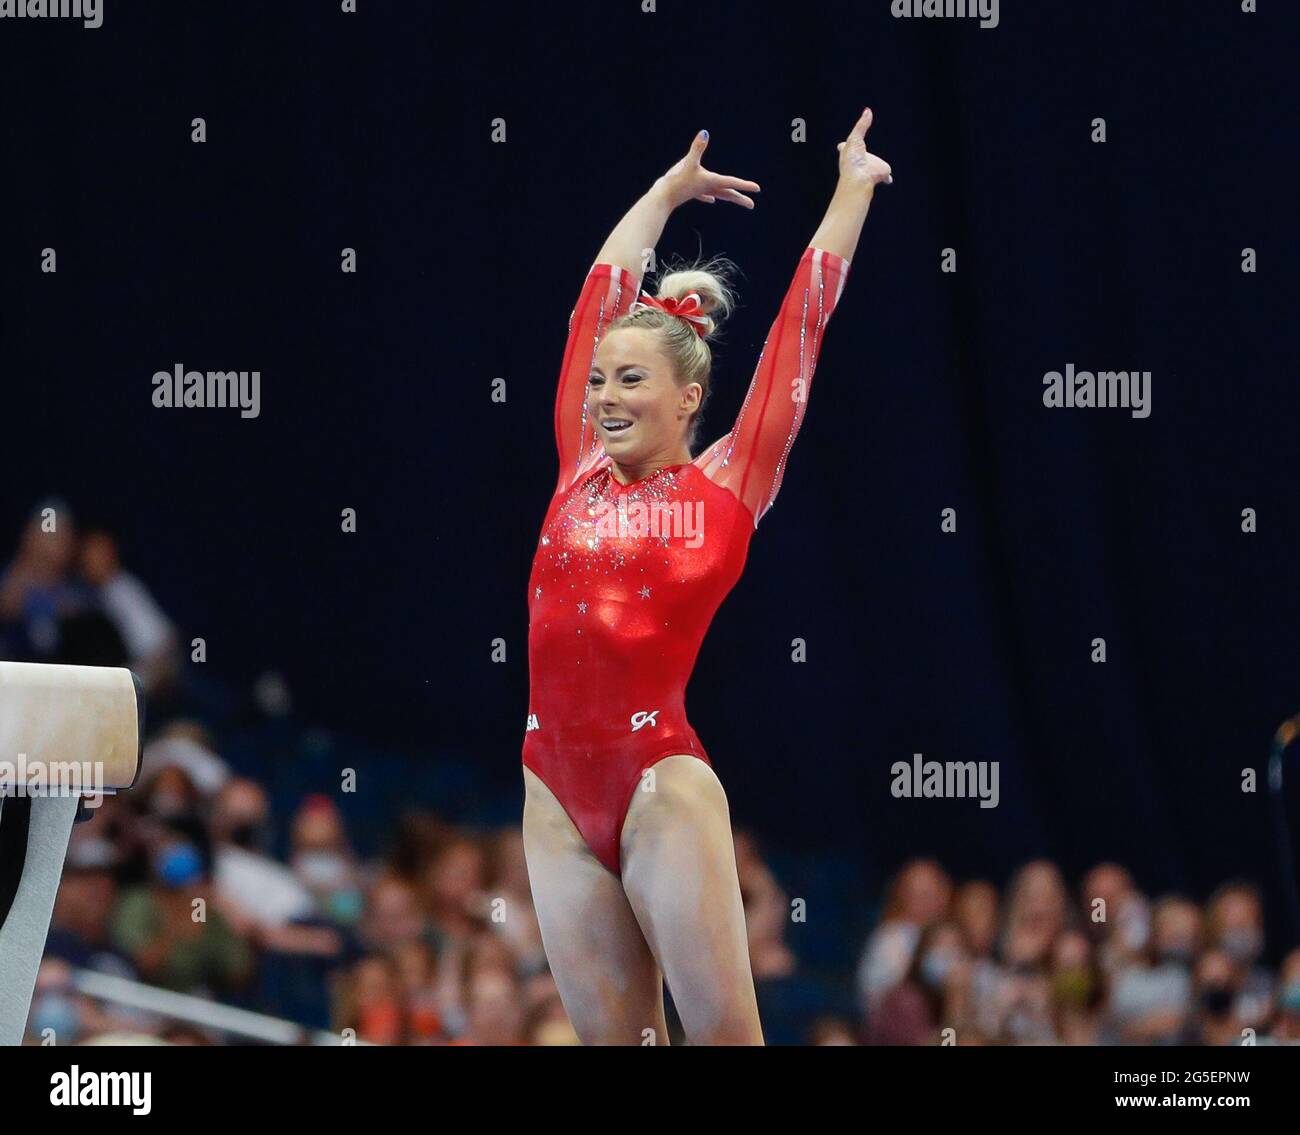 June 25, 2021: MyKayla Skinner lands her balance beam dismount during Day 1 of the 2021 U.S. Women's Gymnastics Olympic Team Trials at the Dome at America's Center in St. Louis, MO. Kyle Okita/CSM Stock Photo